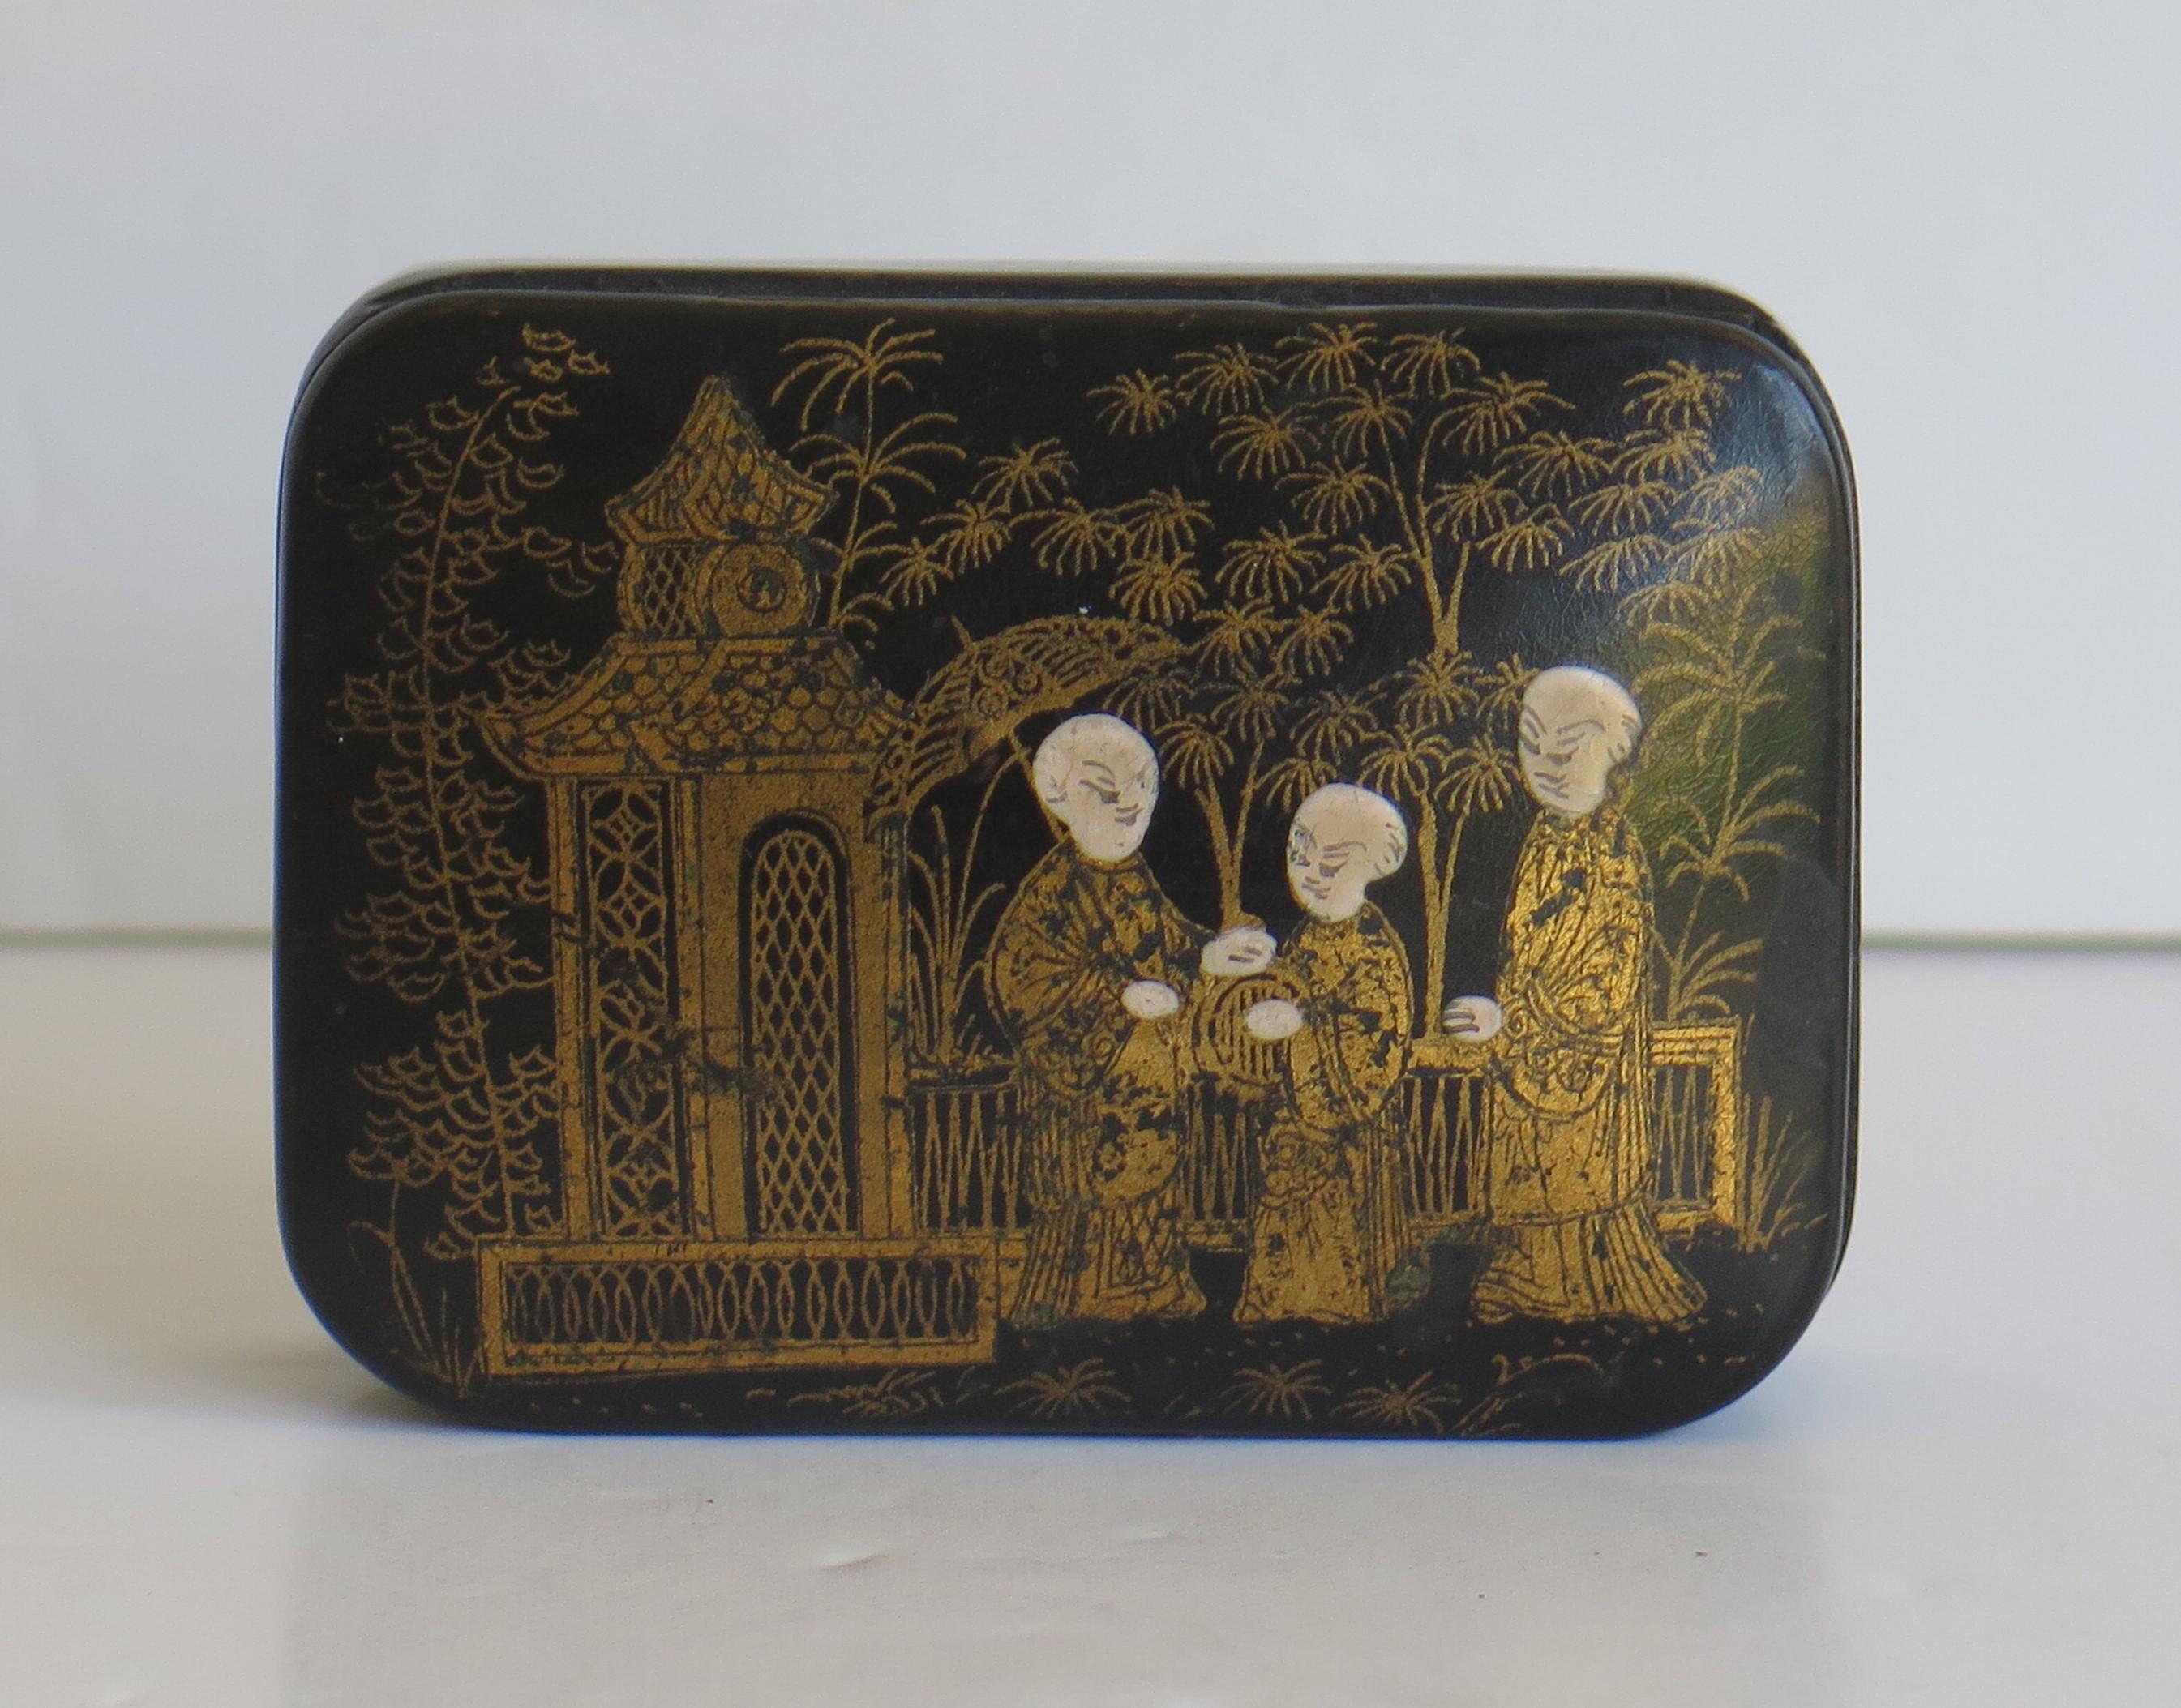 This is a good papier mâché, rectangular shaped black lacquered lidded box, hand enamelled and gilded, made in Japan during the 19th century, early Meiji period.

This rectangular shaped papier mâché box has a well fitting hinged lid, with the box